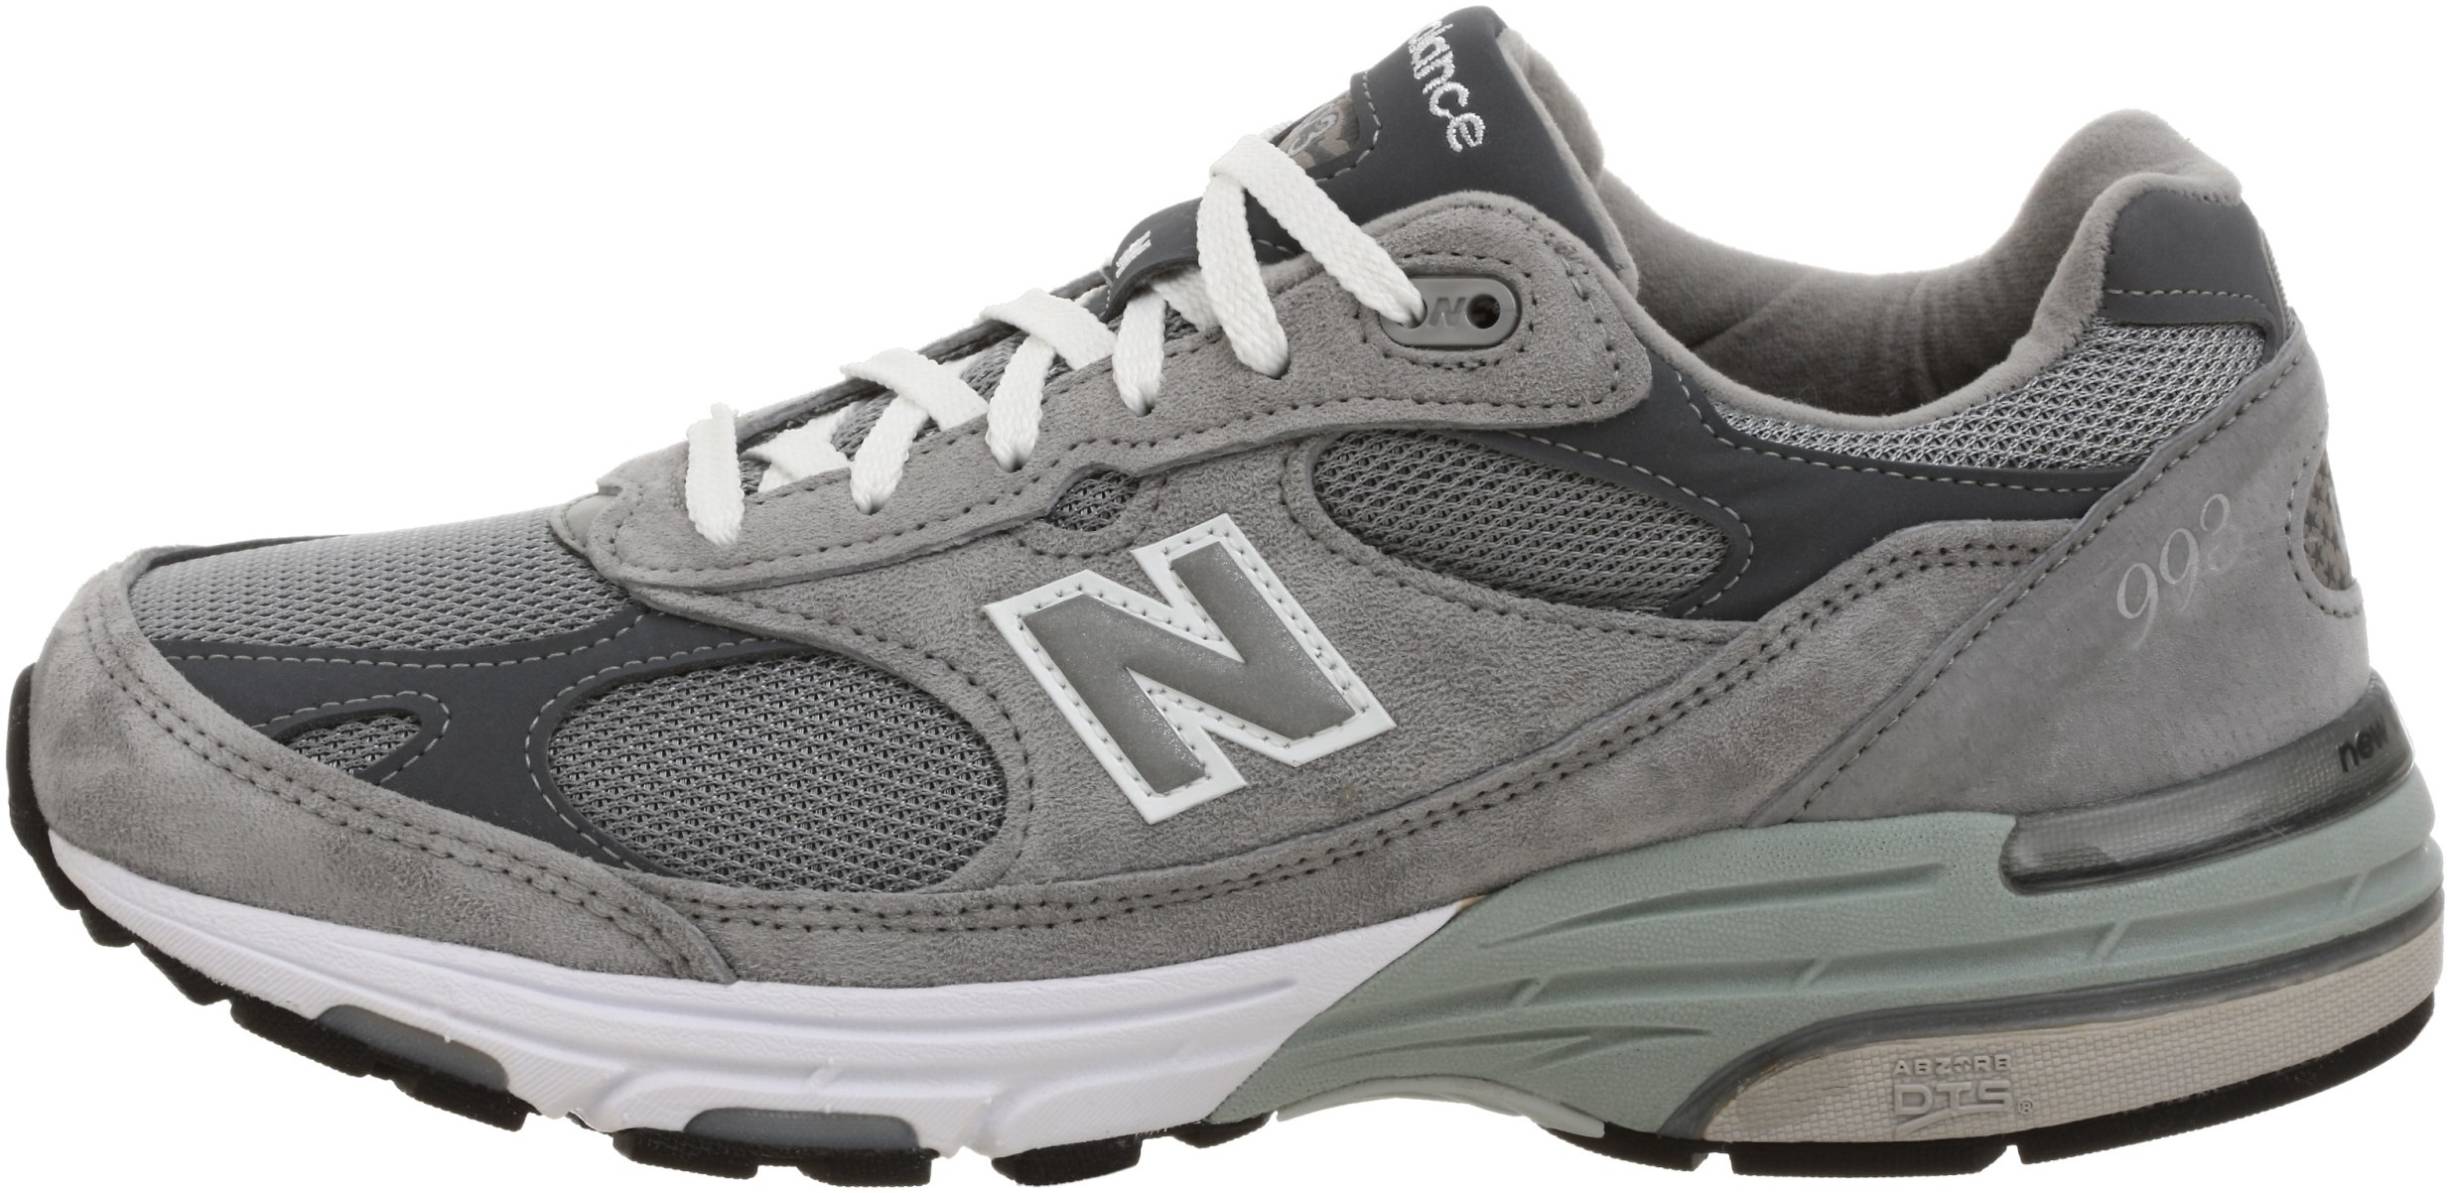 New Balance Made In US 993 sneakers in grey | RunRepeat